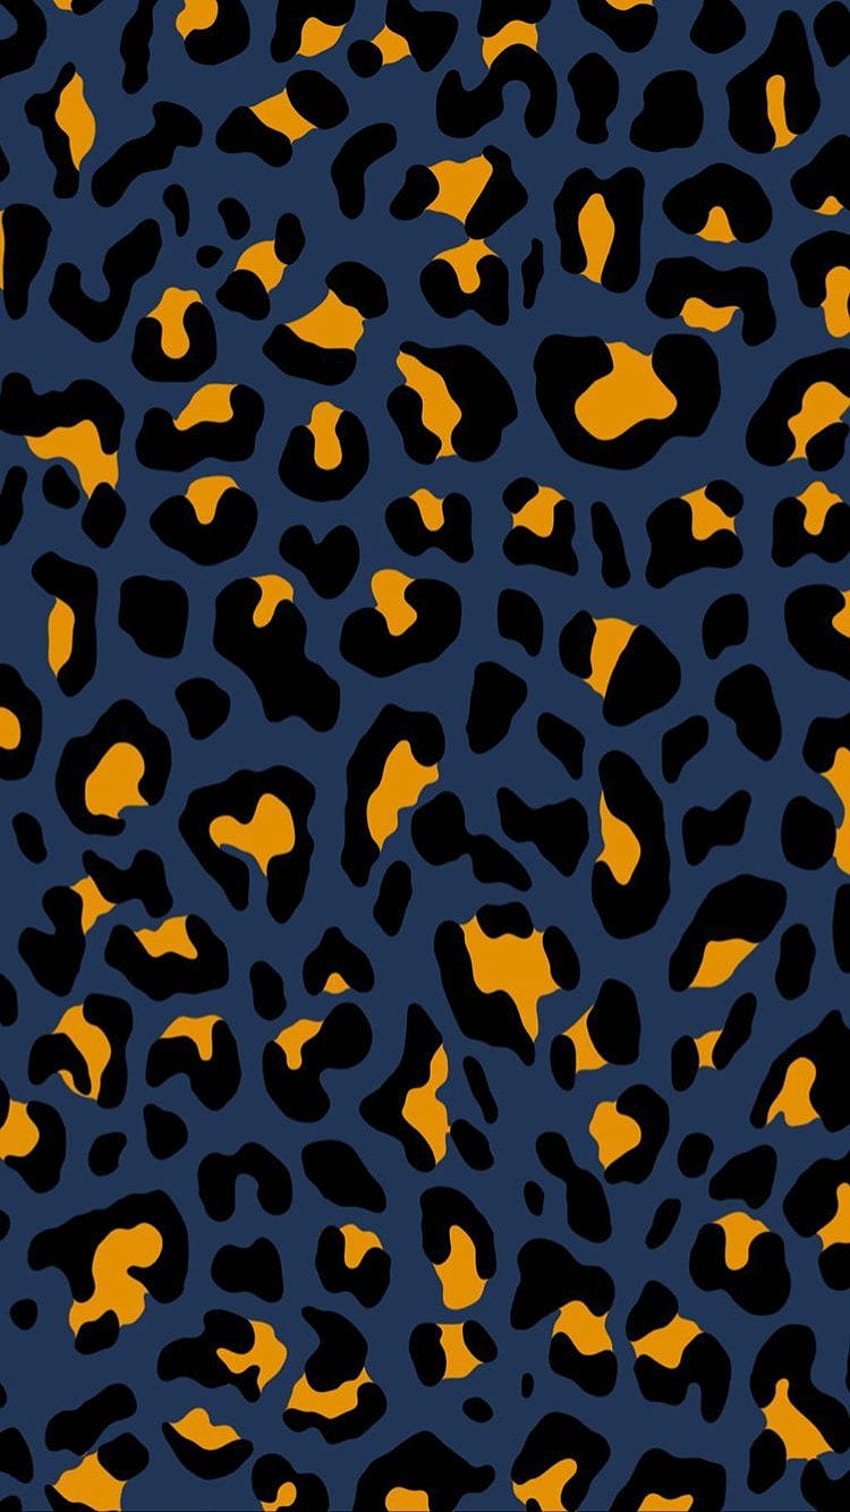 Leopard Print Pattern Images  Free Photos PNG Stickers Wallpapers   Backgrounds  rawpixel